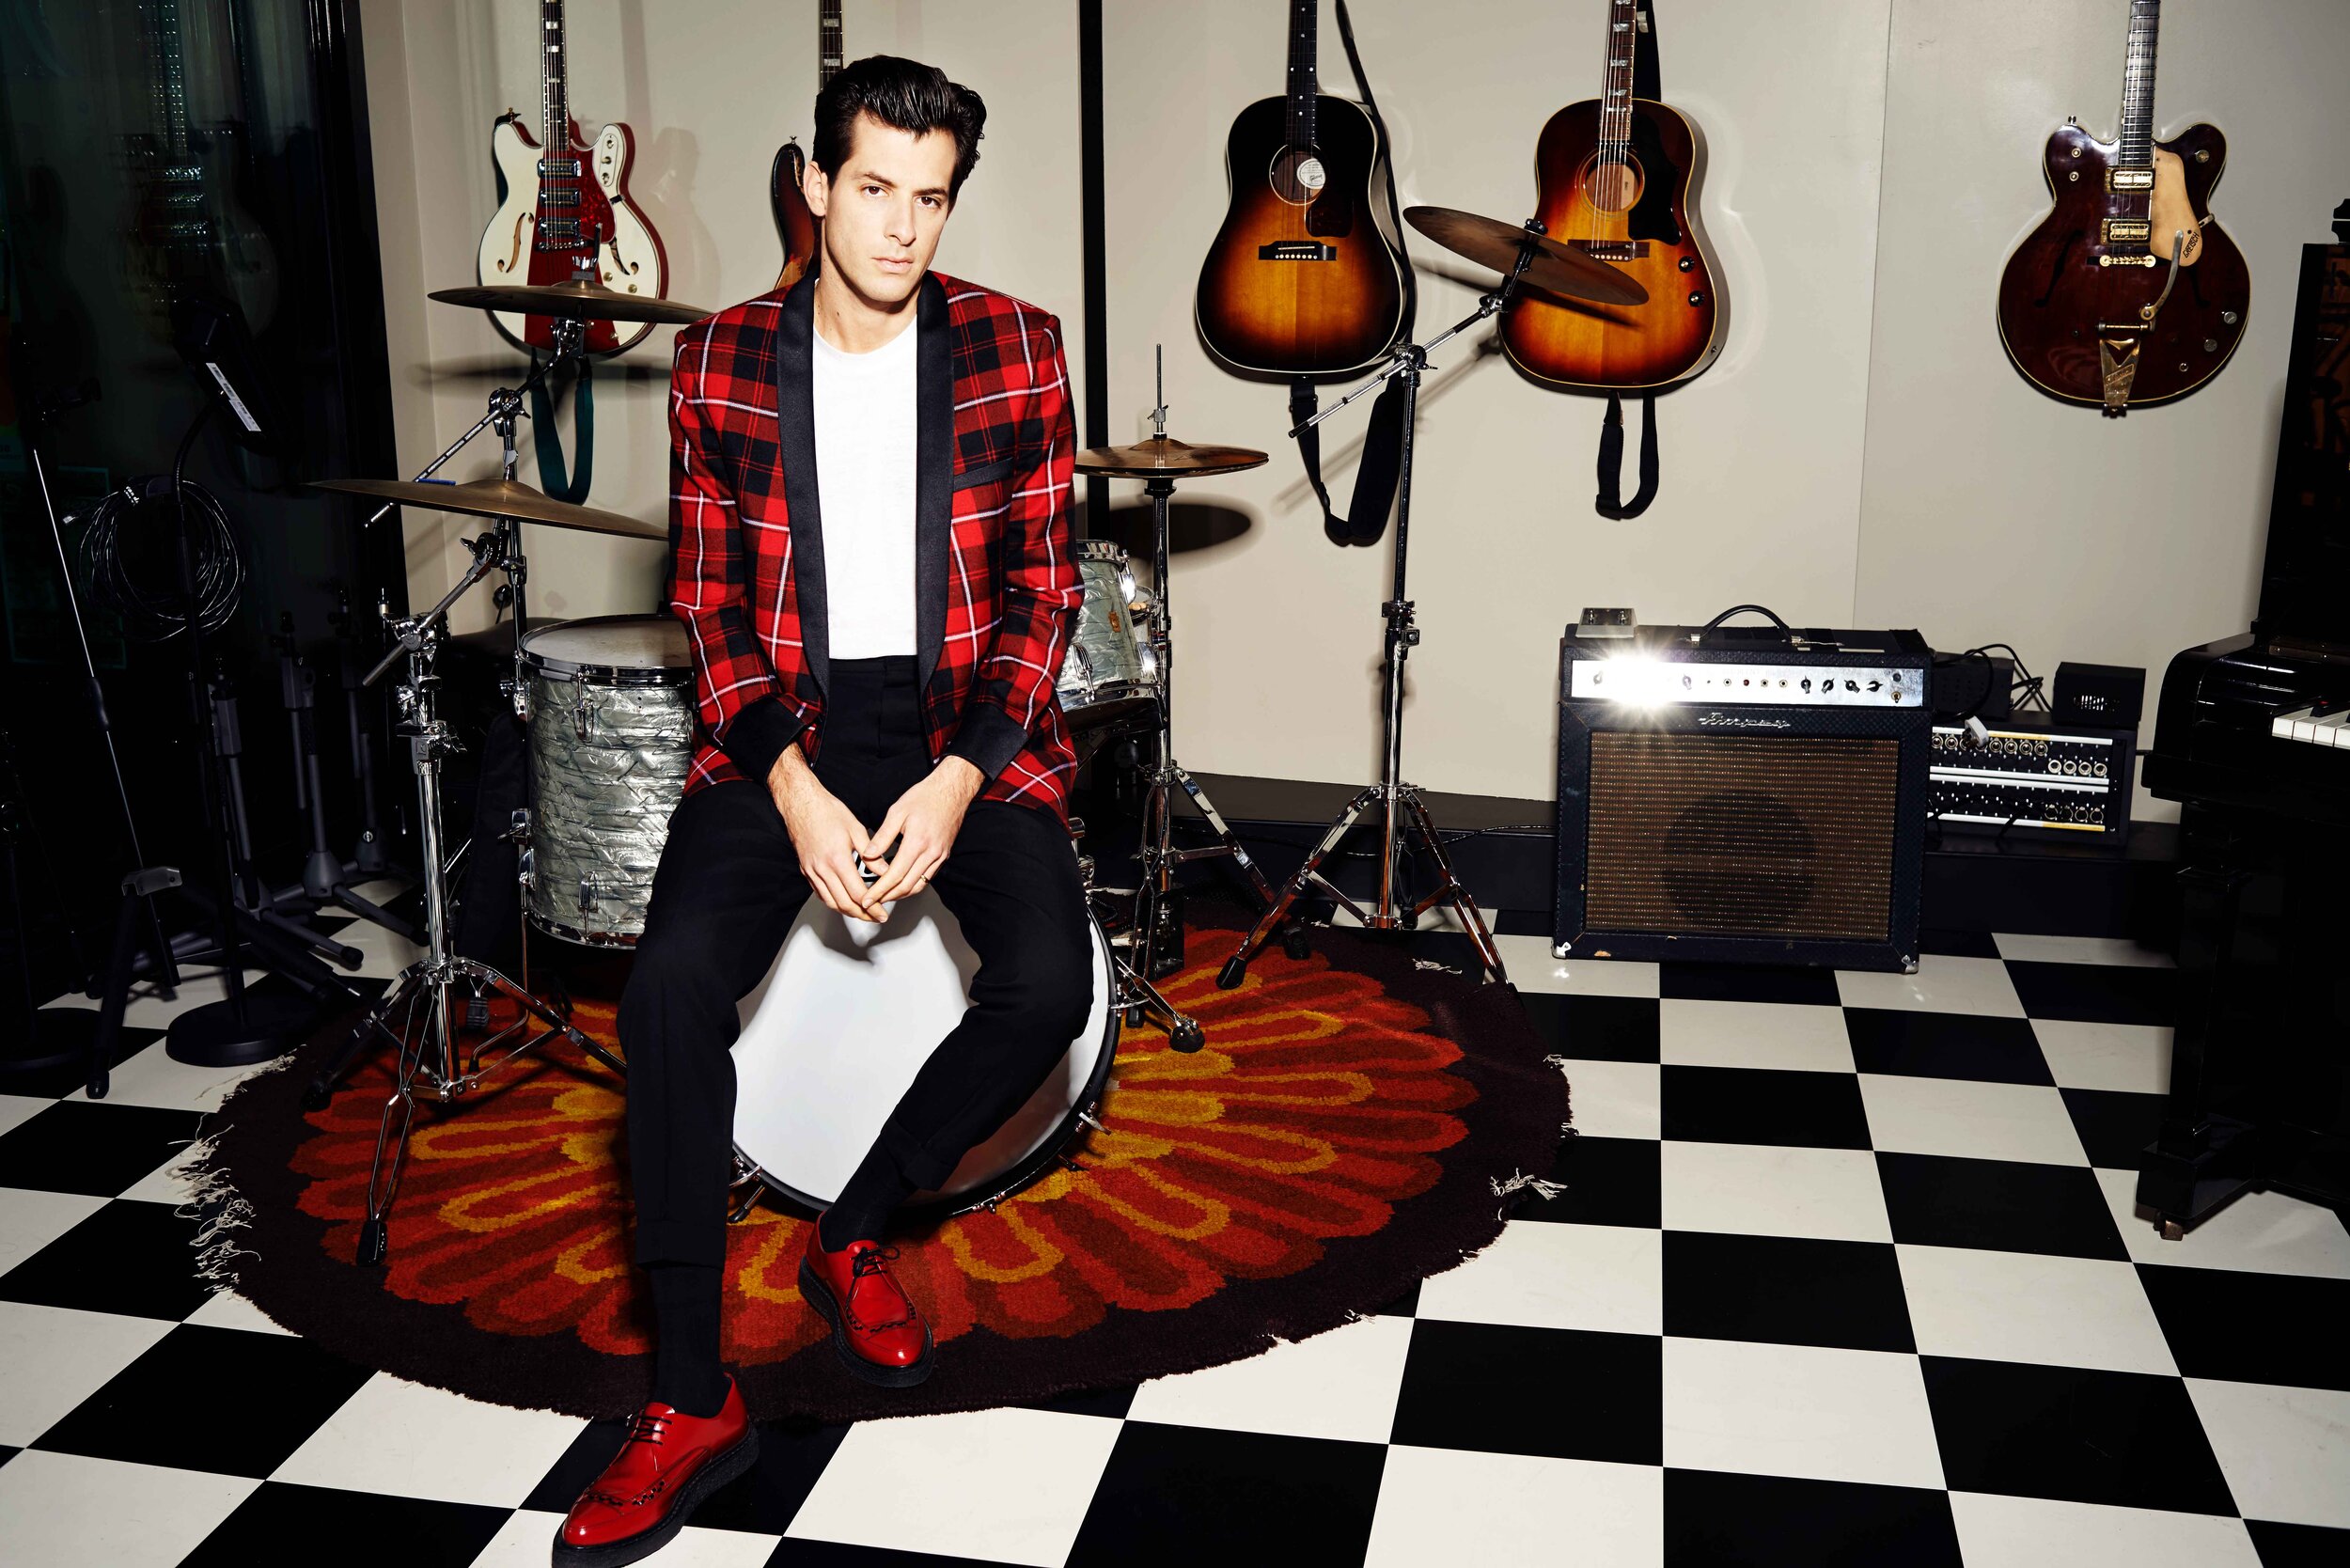 MARK RONSON BY ARVED COLVIN-SMITH